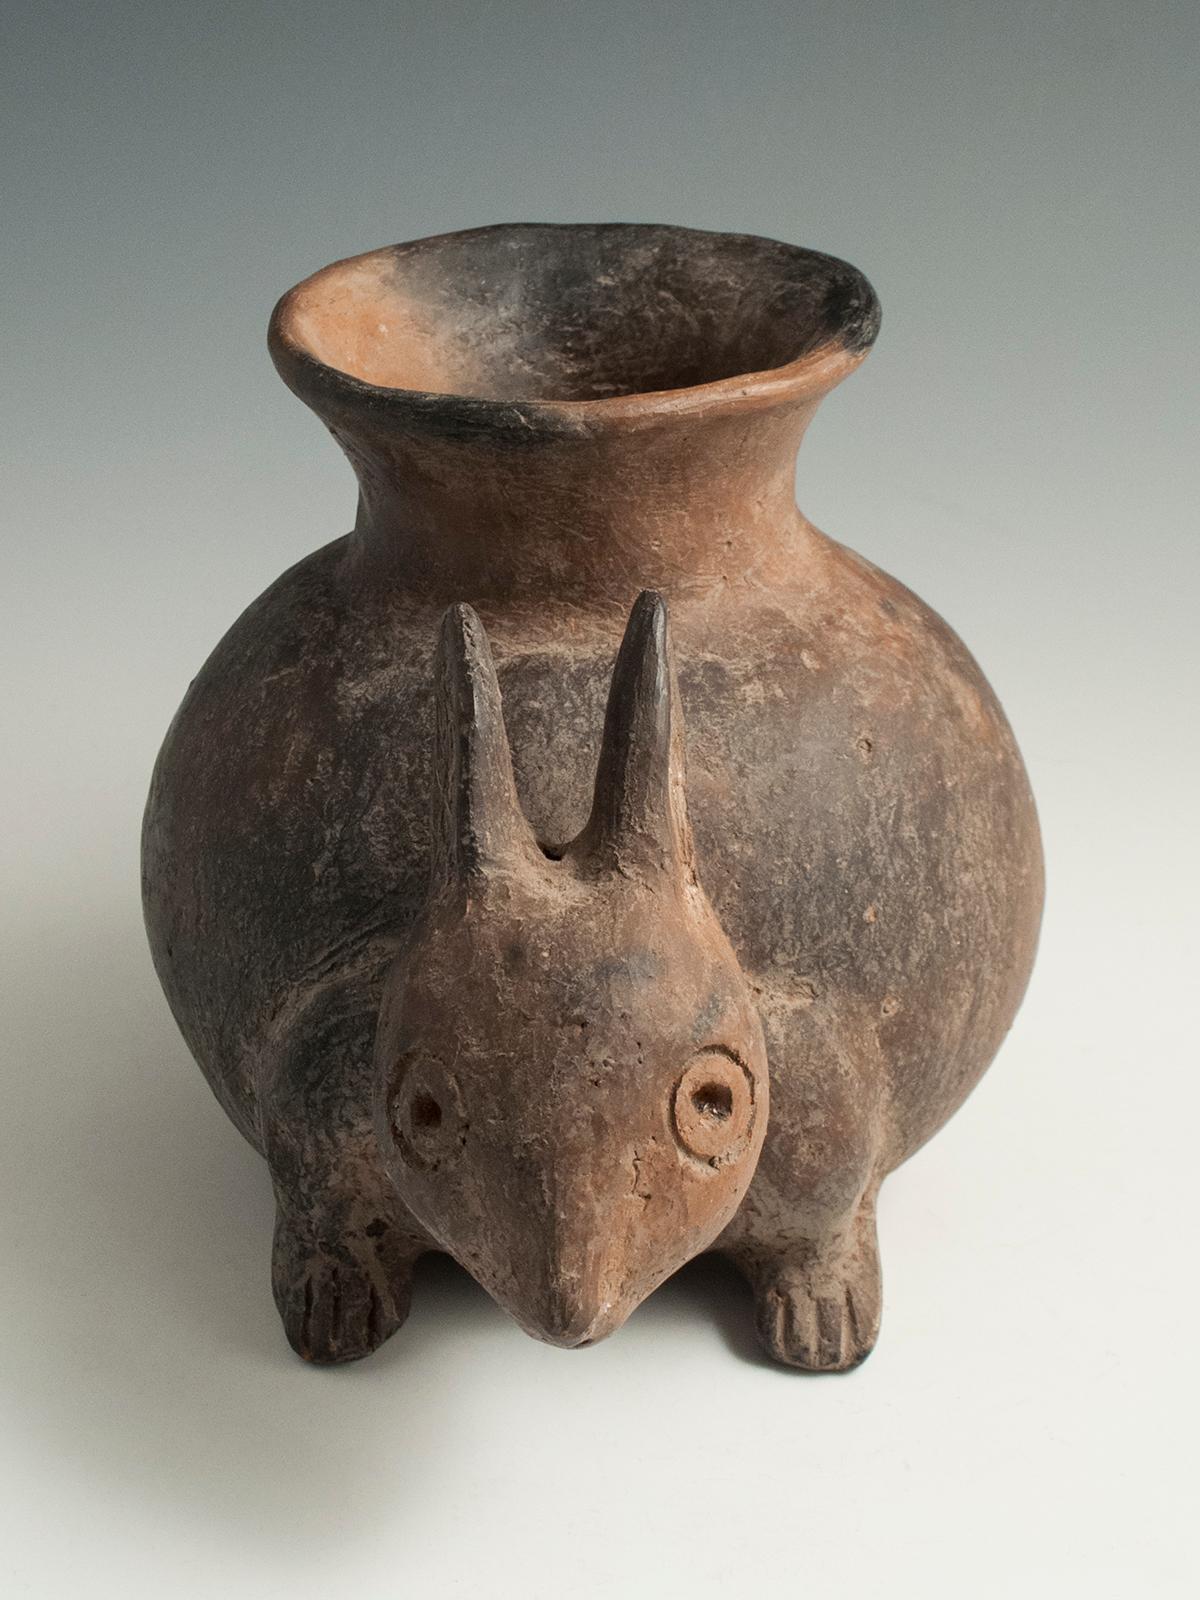 Earthenware Rabbit Vessel, Possibly Colima, West Mexico

There is a certain frightened charm about this unfurnished bunny, who is a bit rough-hewn, but intact.
Measures: 6